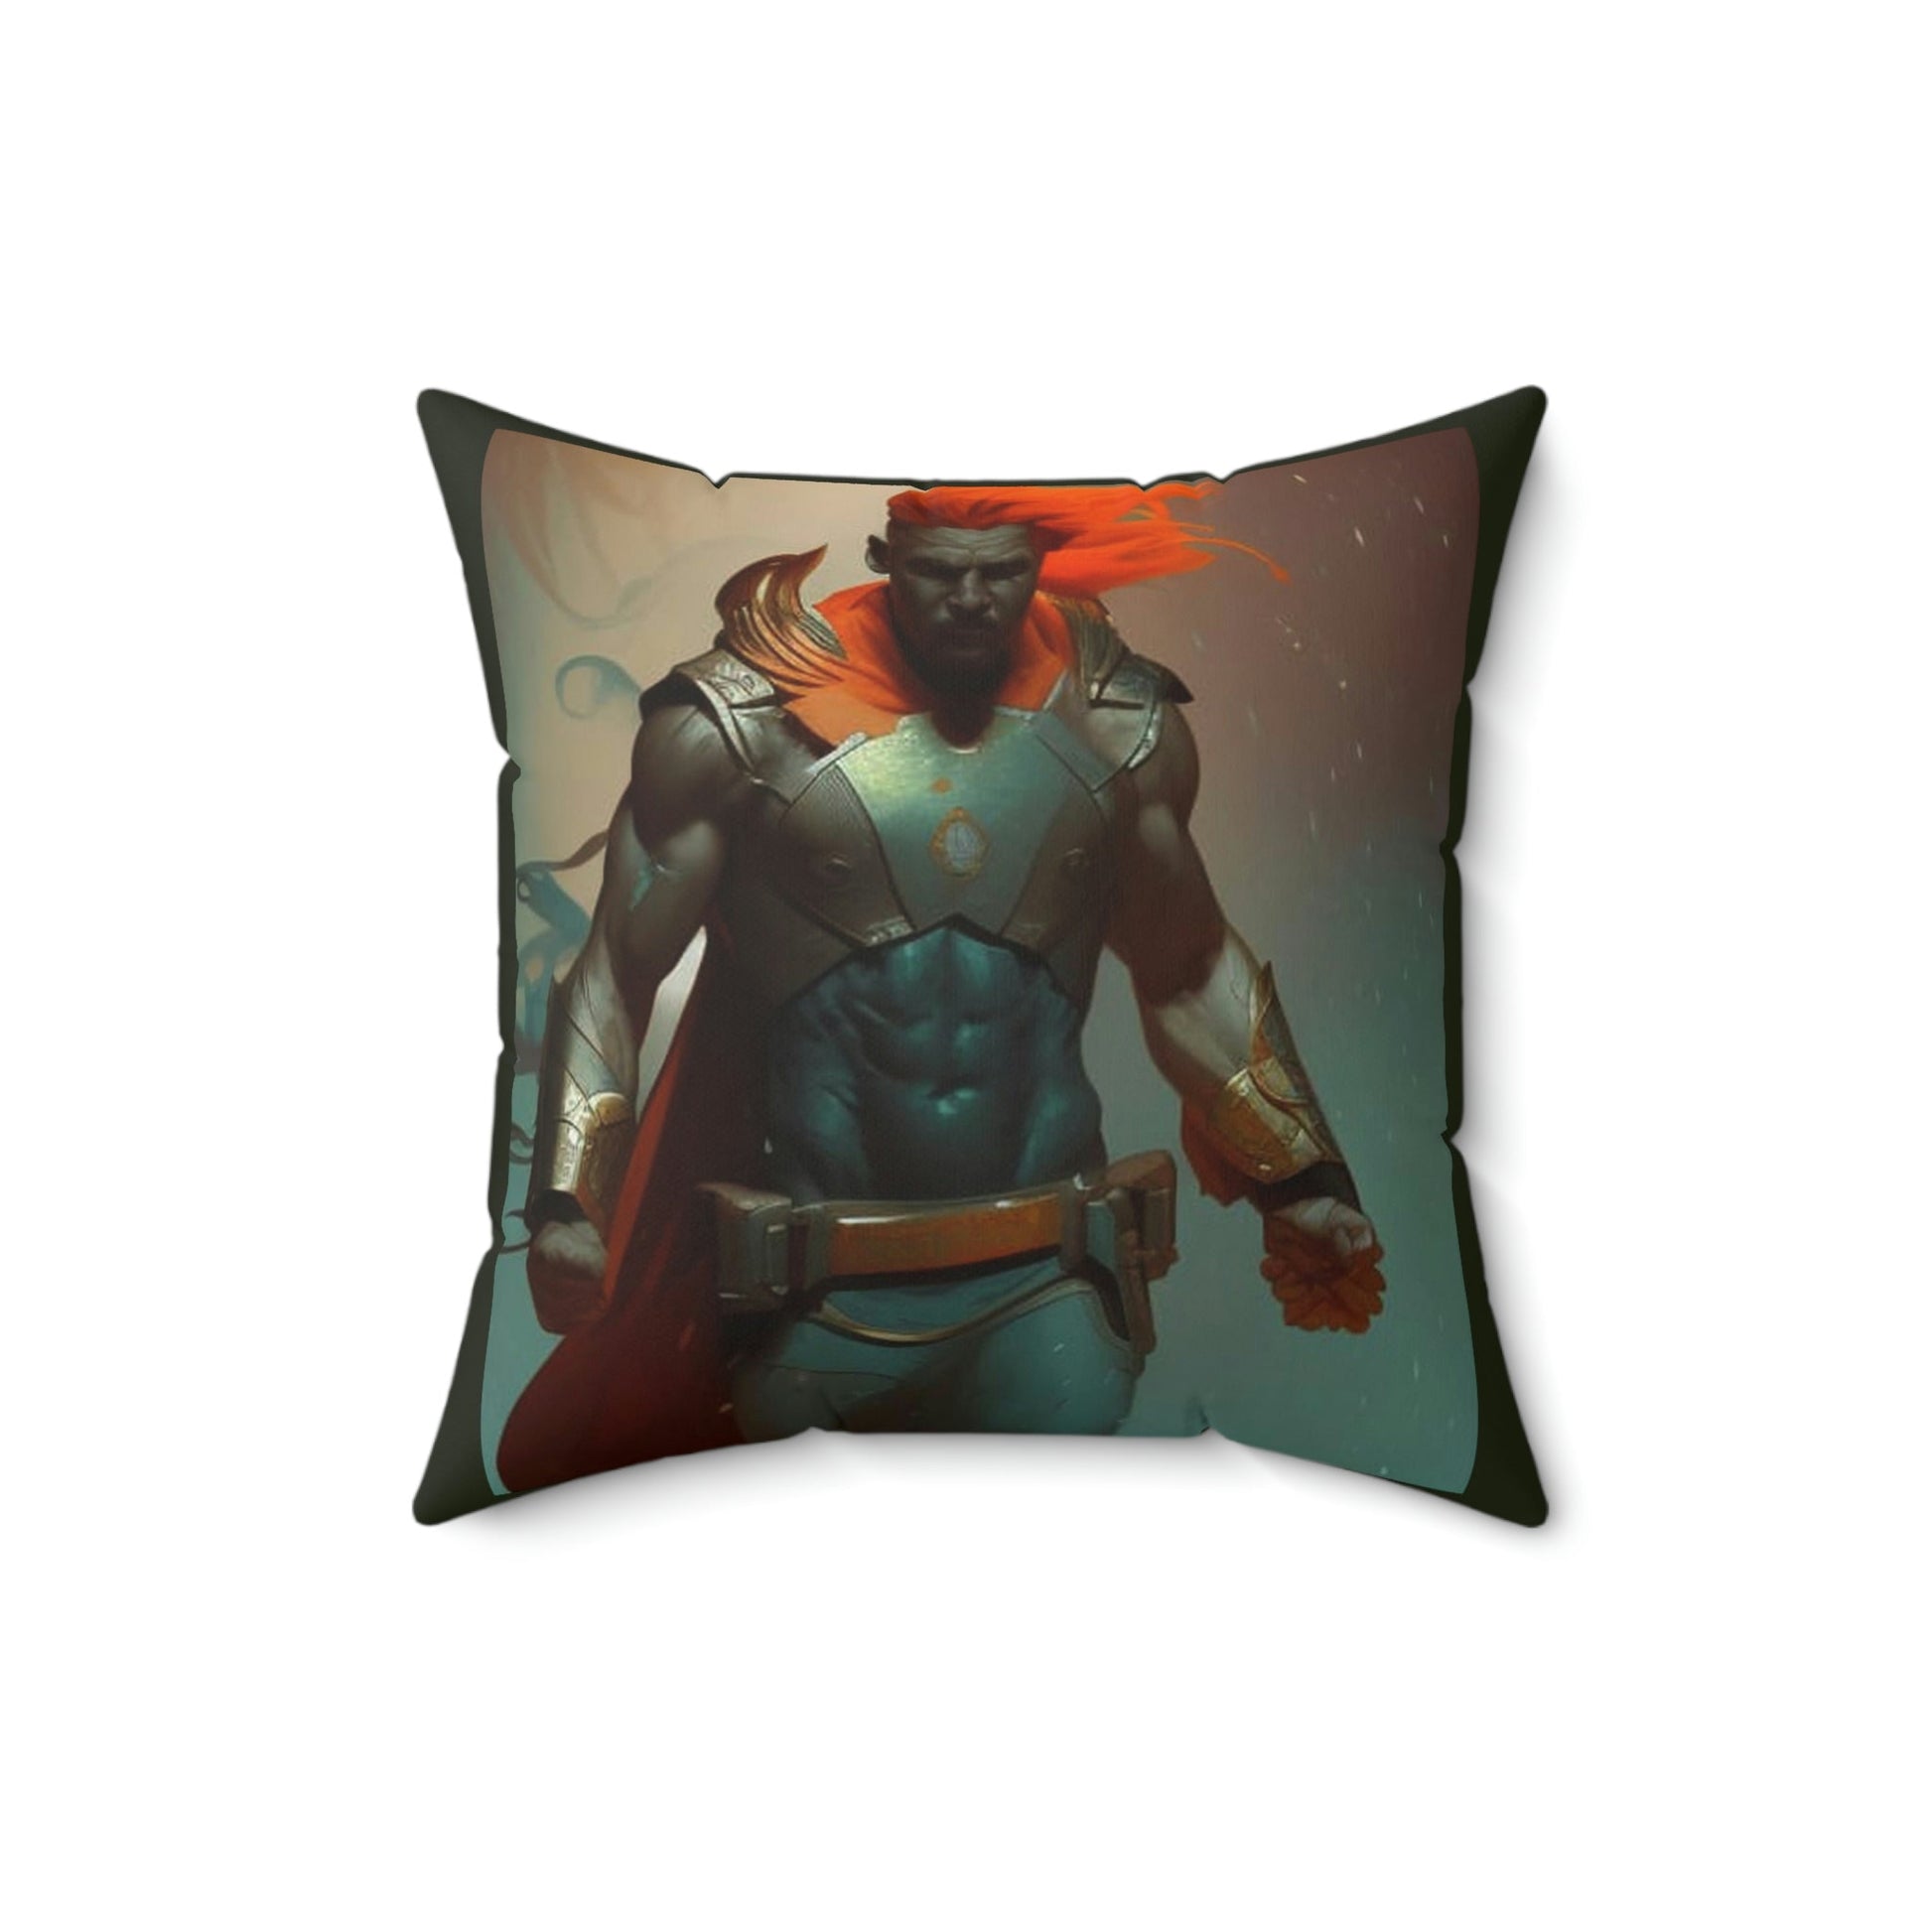 Stay Weird VII Square Pillow